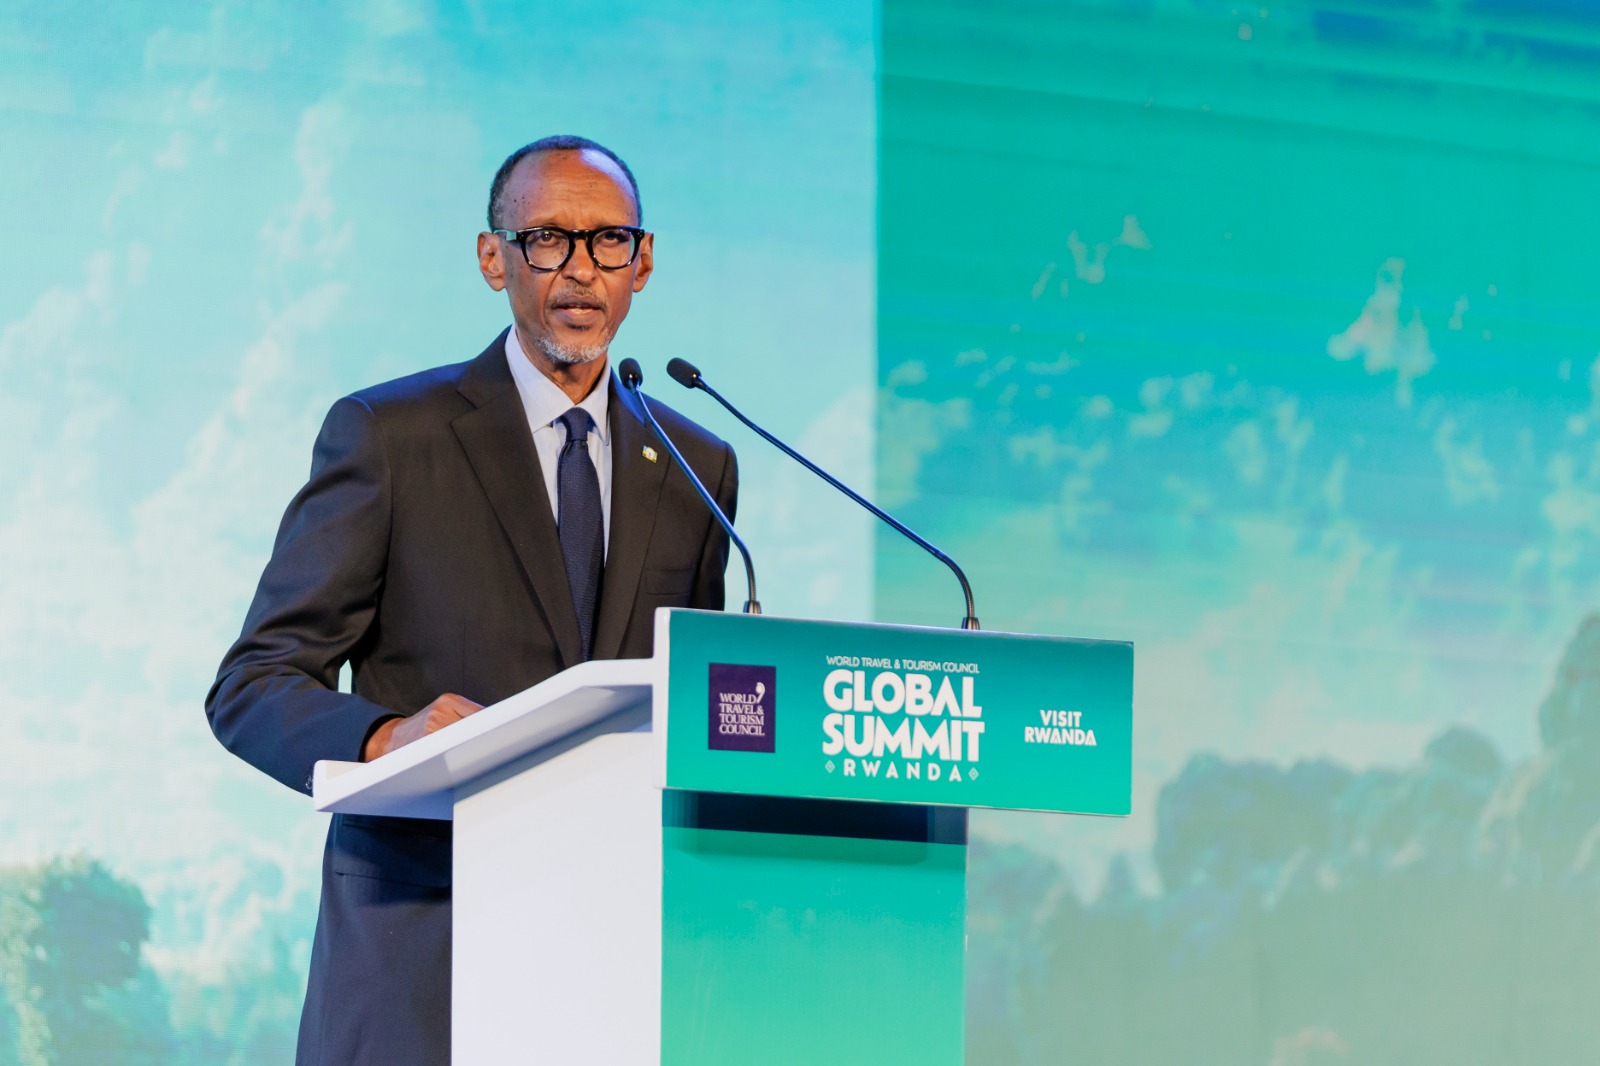 23rd world travel & tourism council global summit